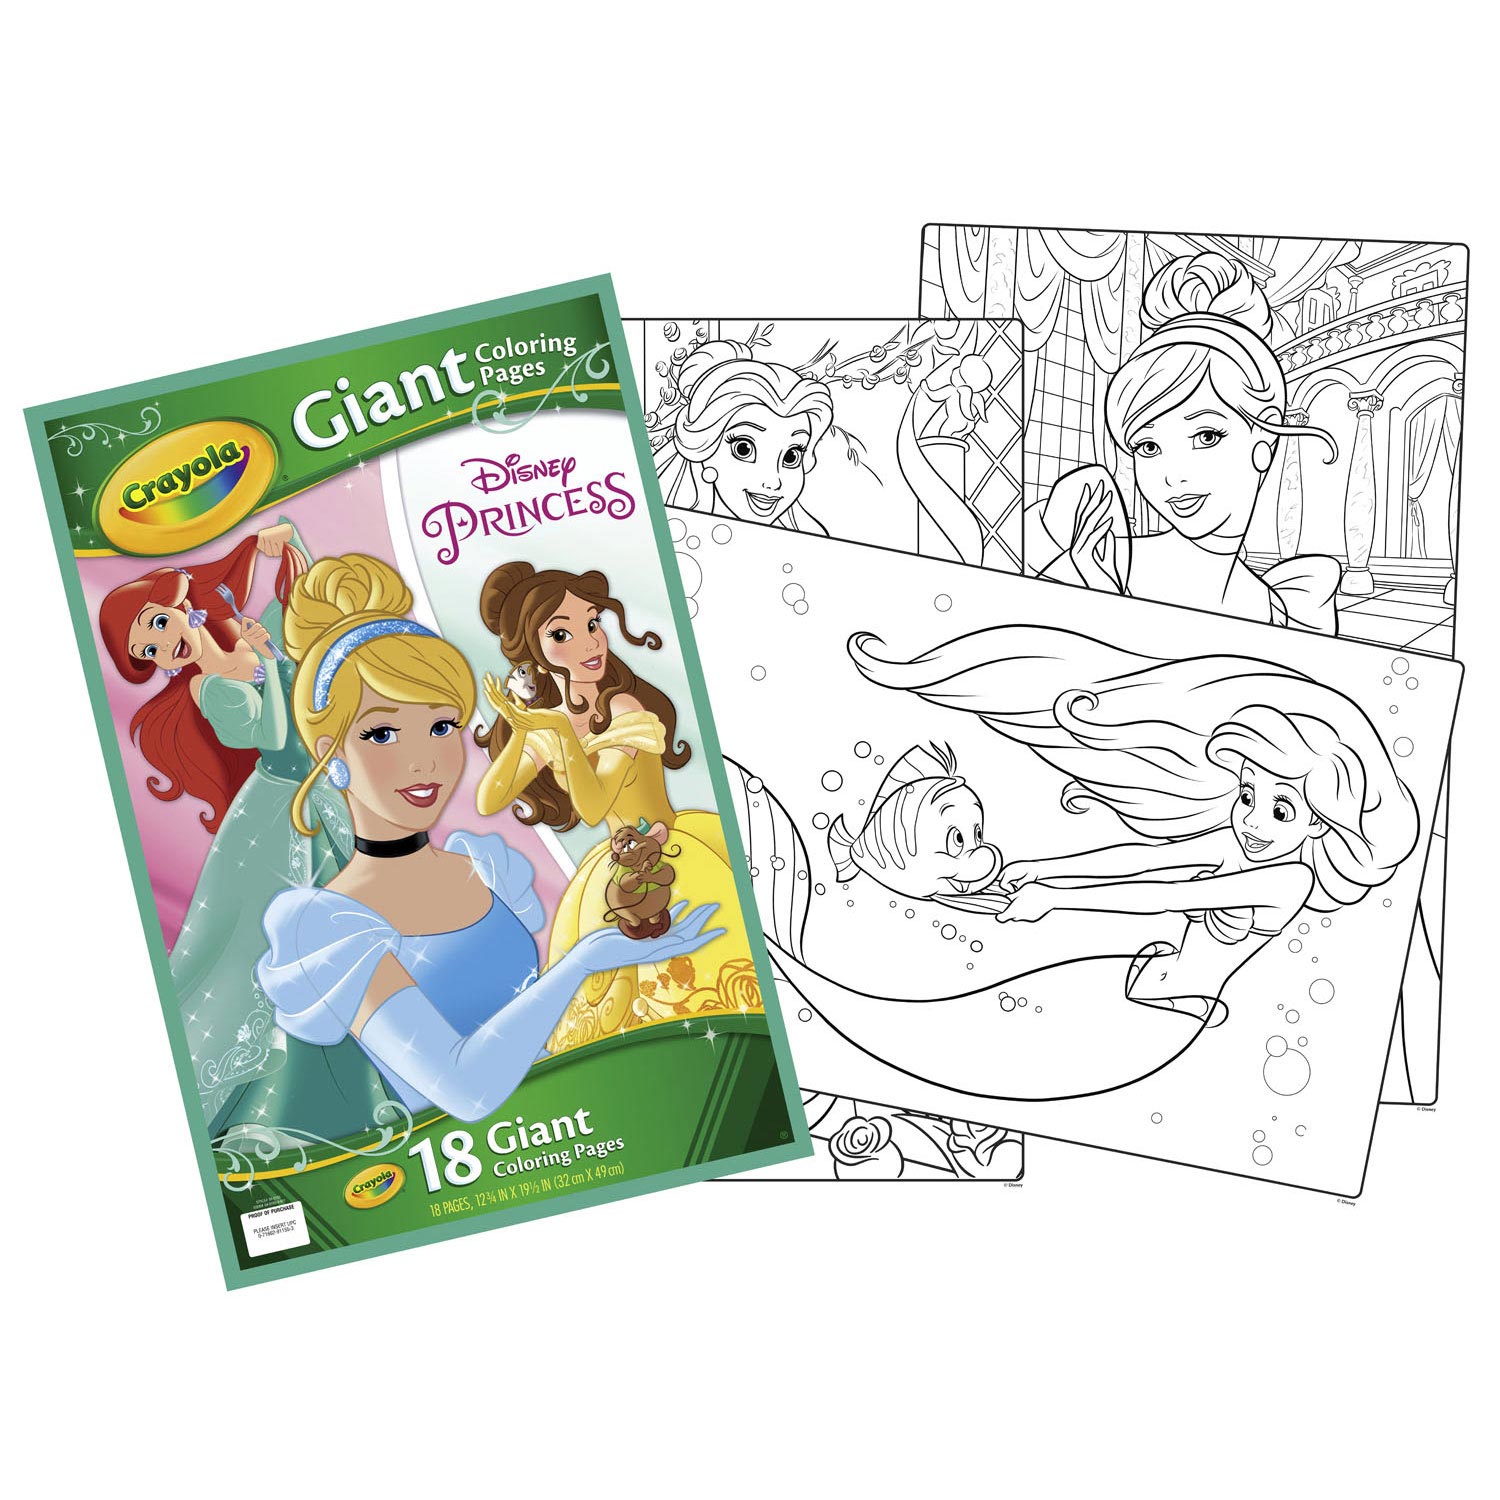 Crayola Giant Coloring Pages   Disney Princess   Thimble Toys